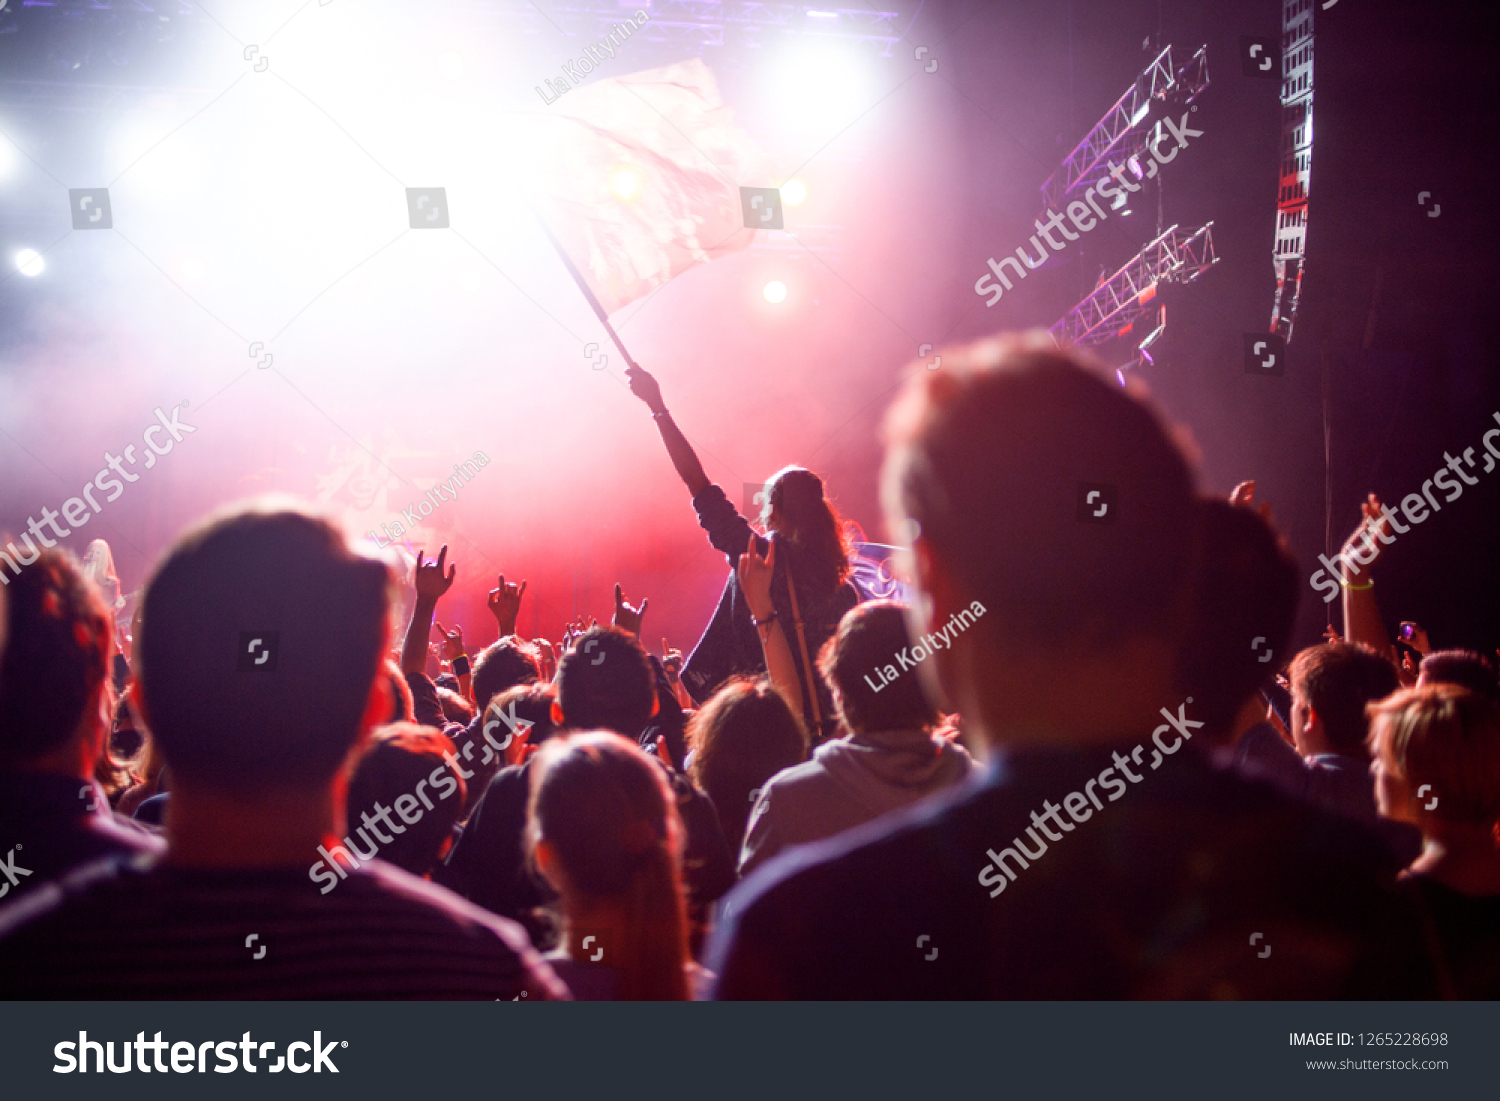 Rock concert, people in the hall on the background of the stage and spotlights. Fans waving the flag and making hands up #1265228698